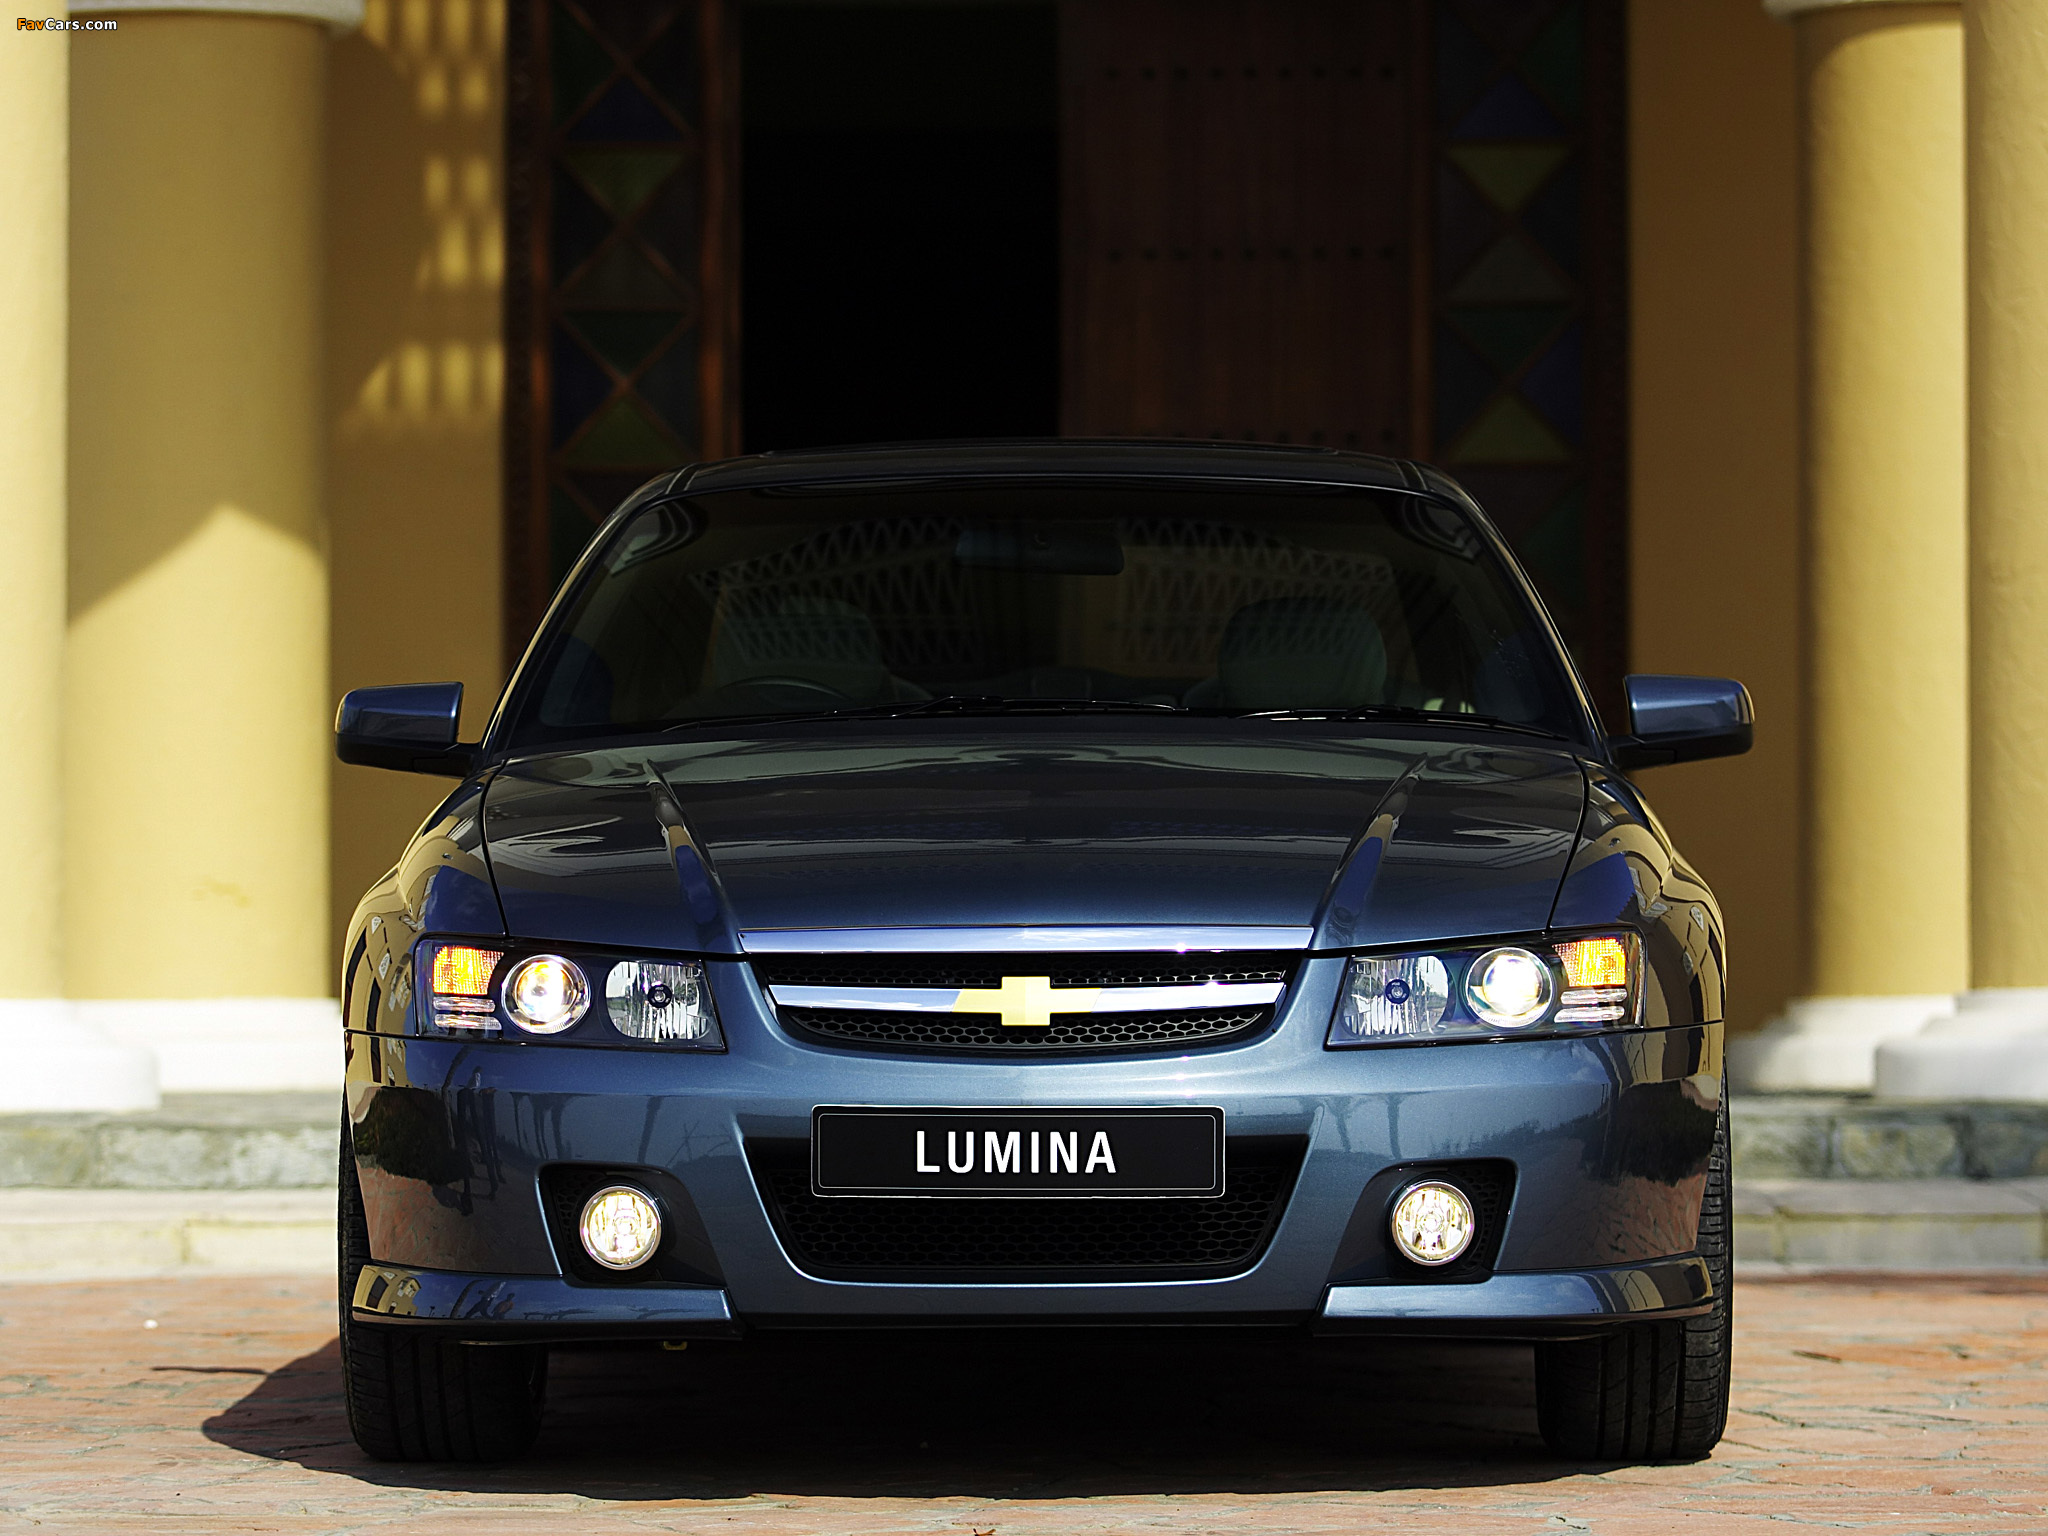 Chevrolet Lumina Royale 2006 pictures (2048 x 1536)